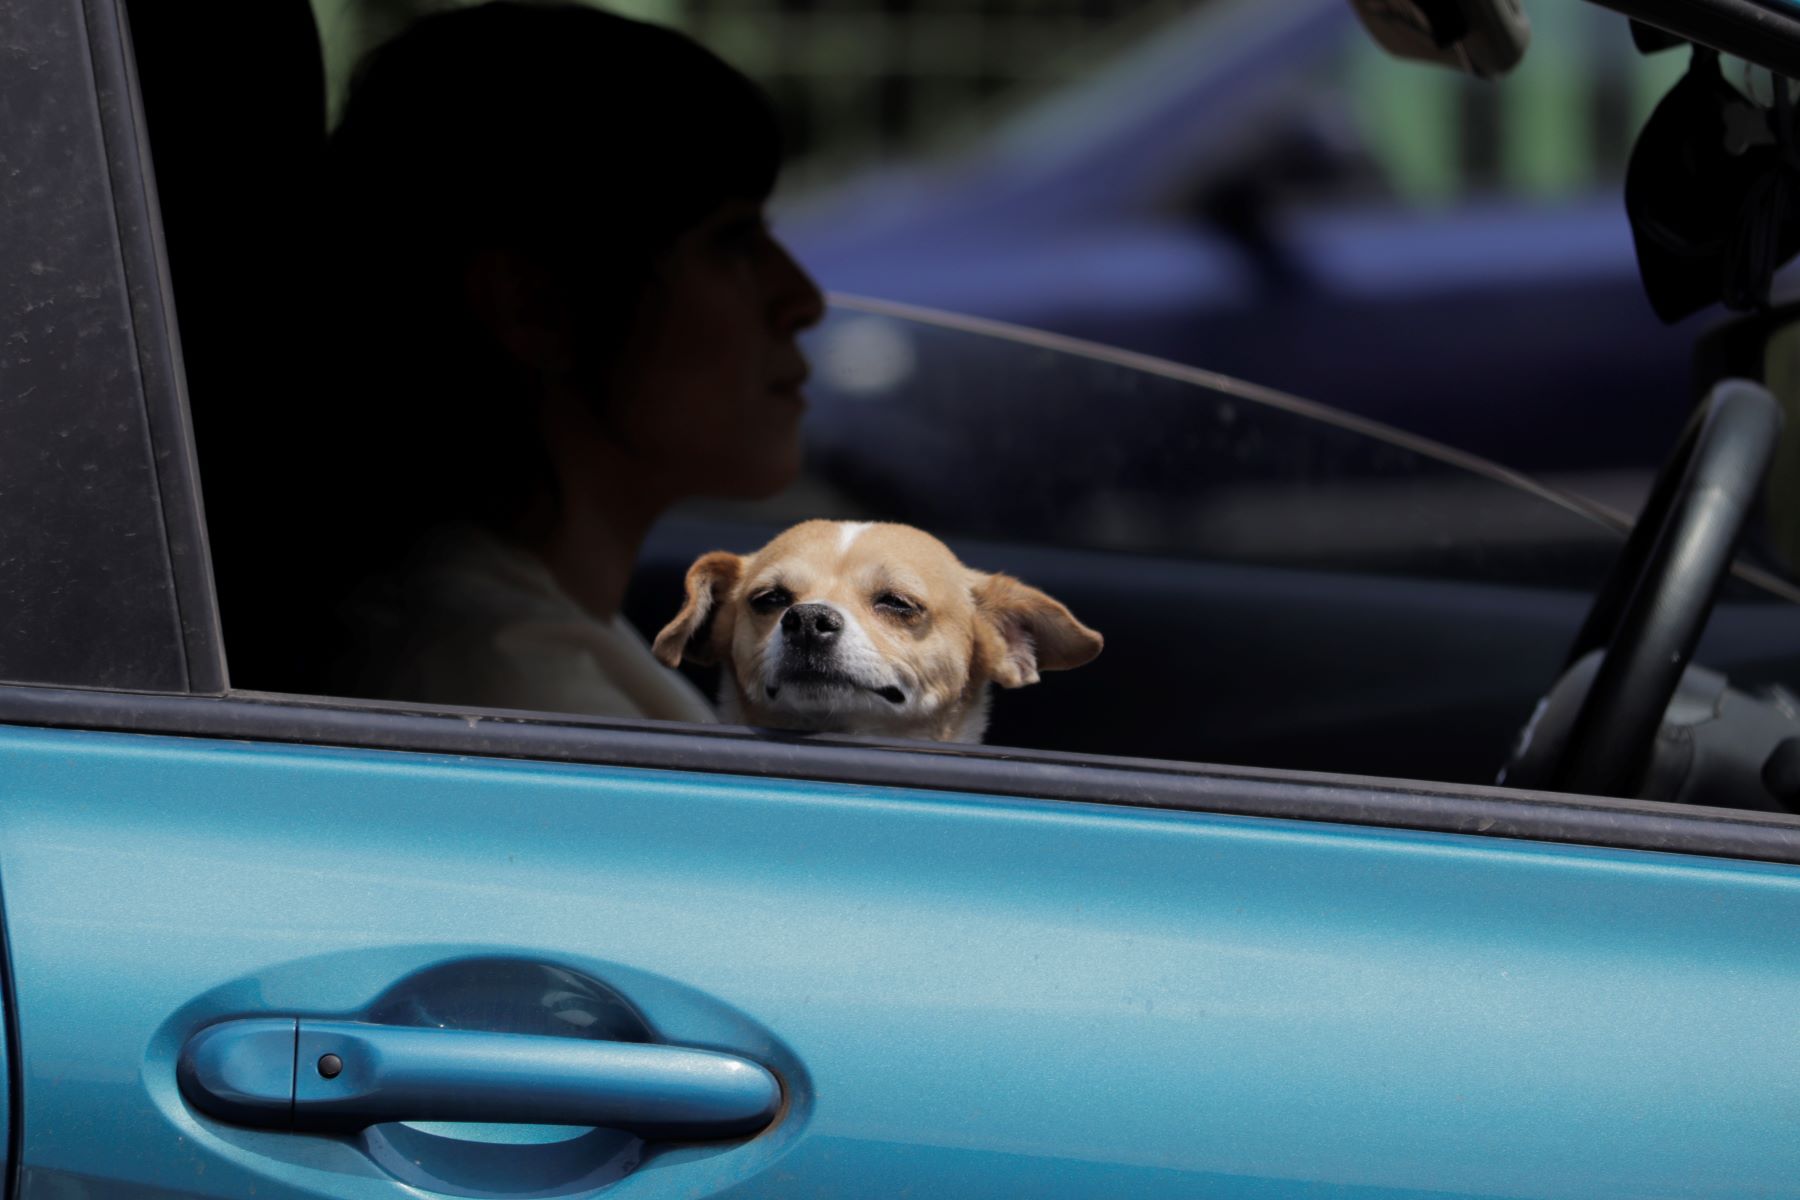 A dog staring out the window in a car from the passenger seat